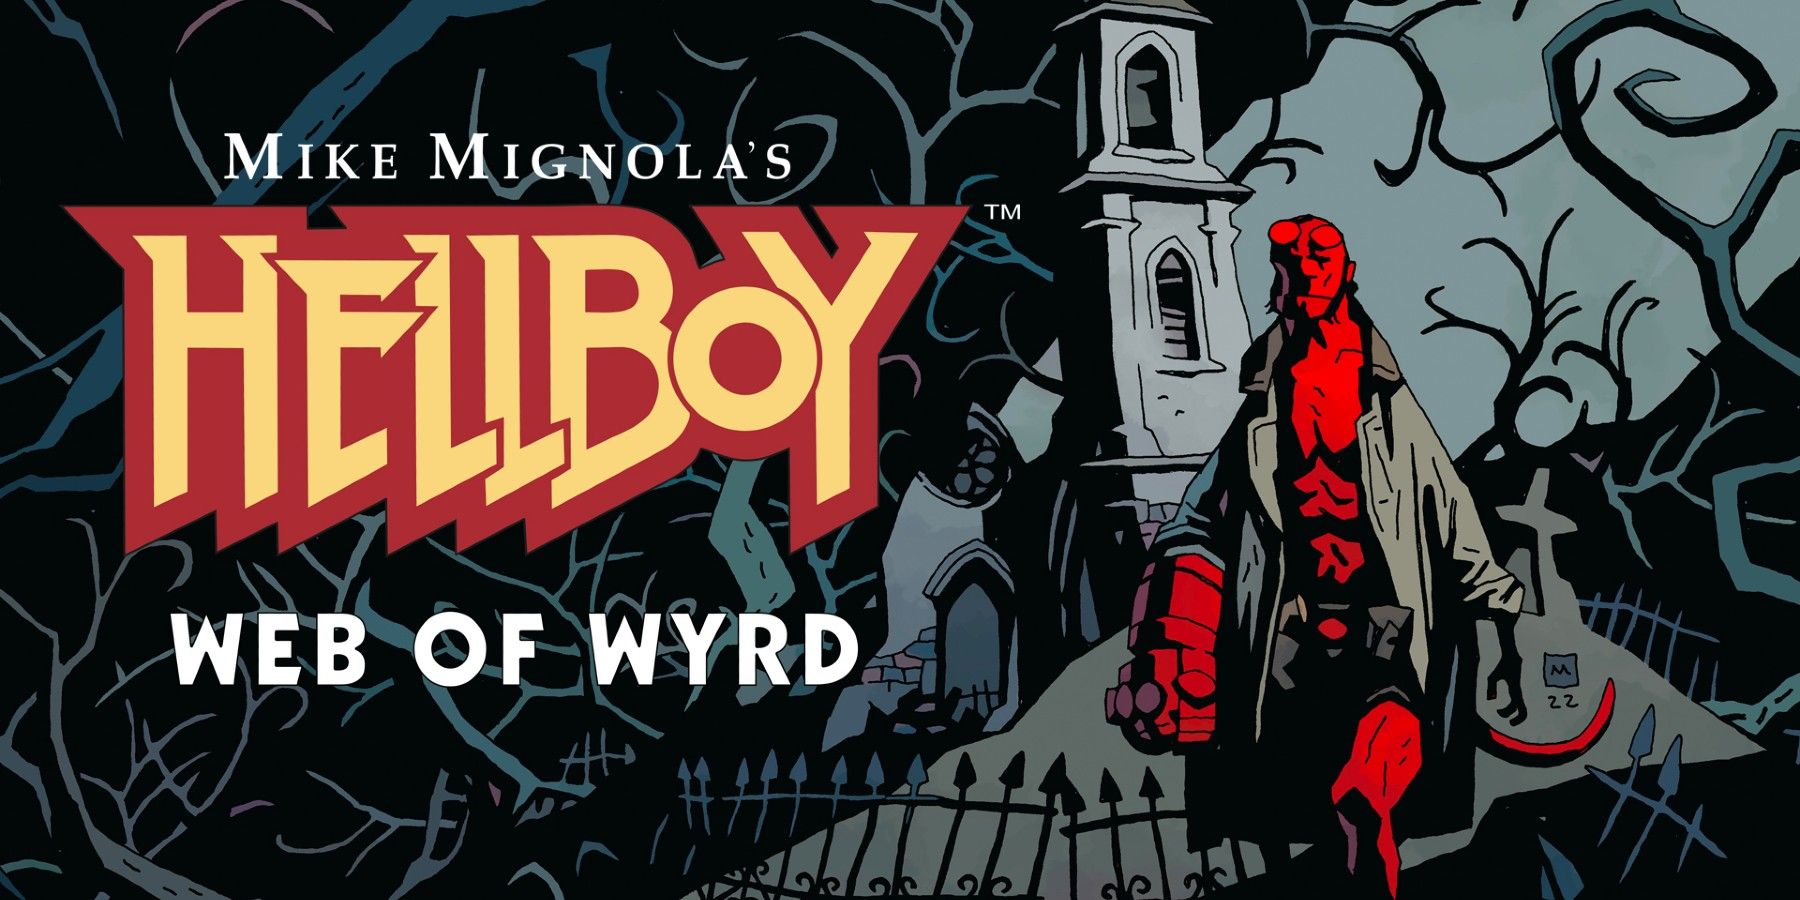 hellboy-web-of-wyrd-already-stands-out-among-a-superhero-crowd